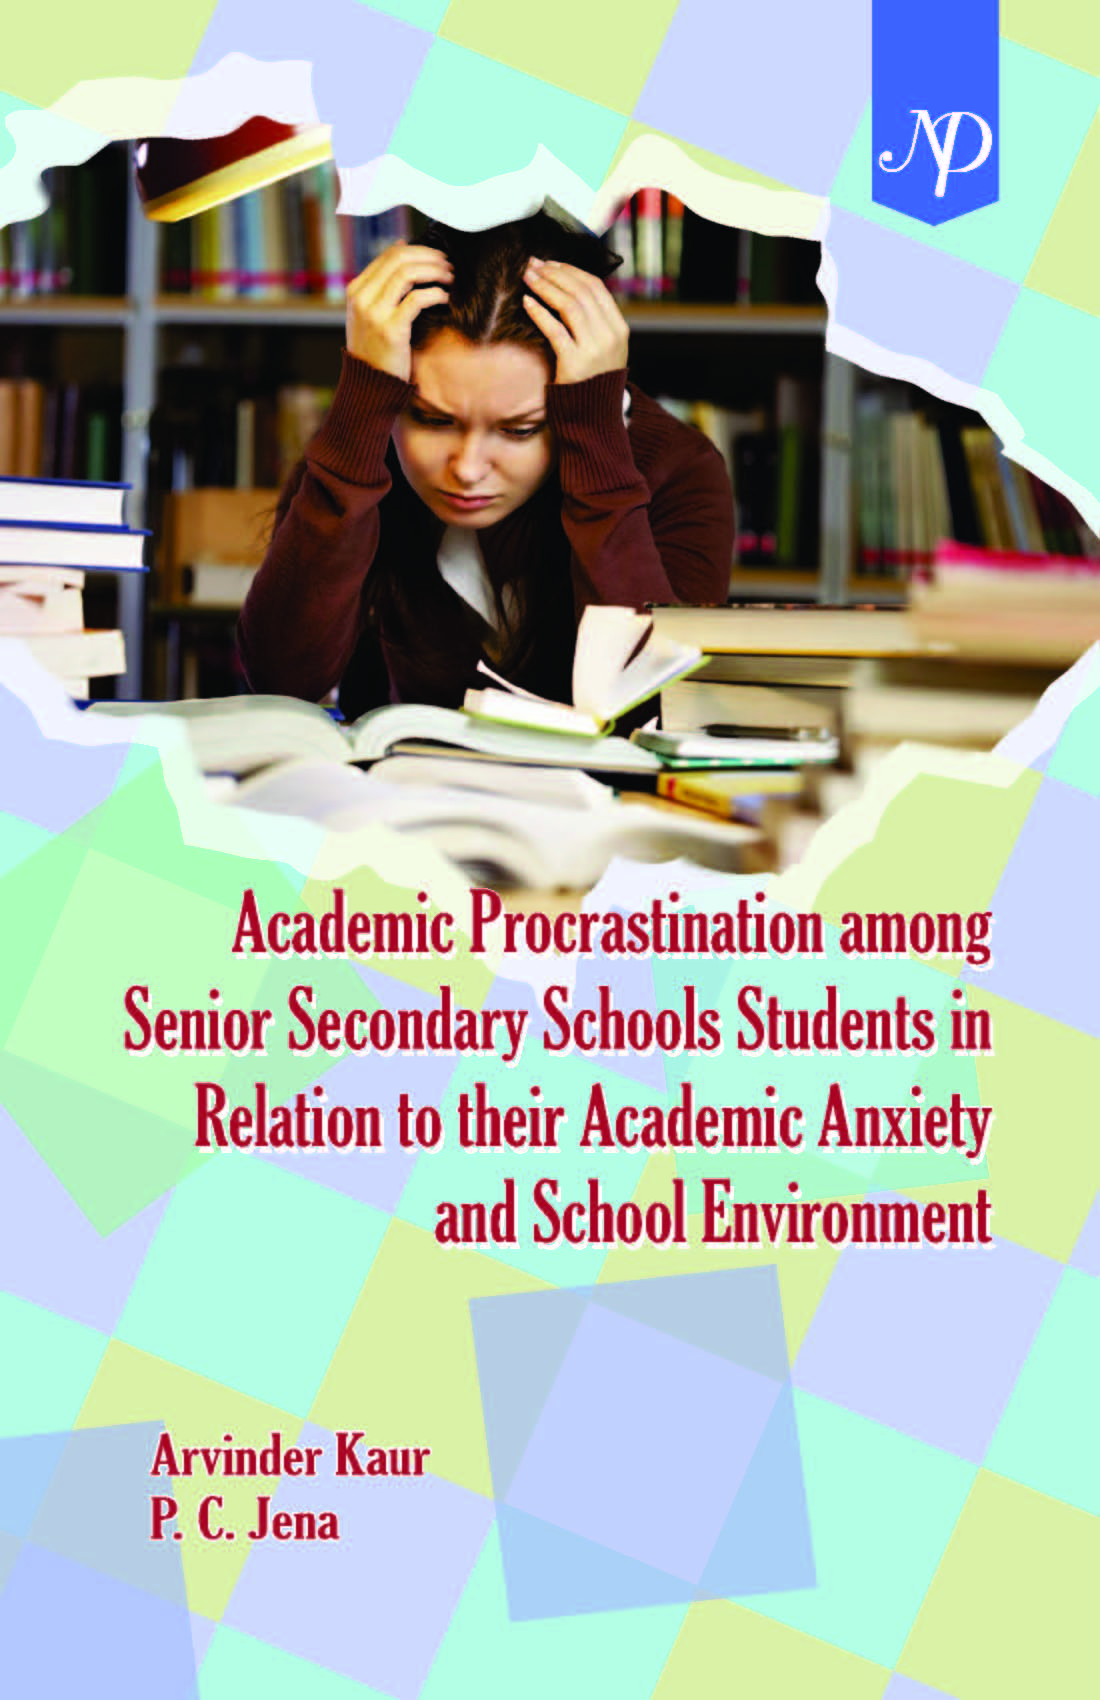 Academic Procrastination among Senior Secondary Schools Students in Relation to their Academic Anxiety and School Environment